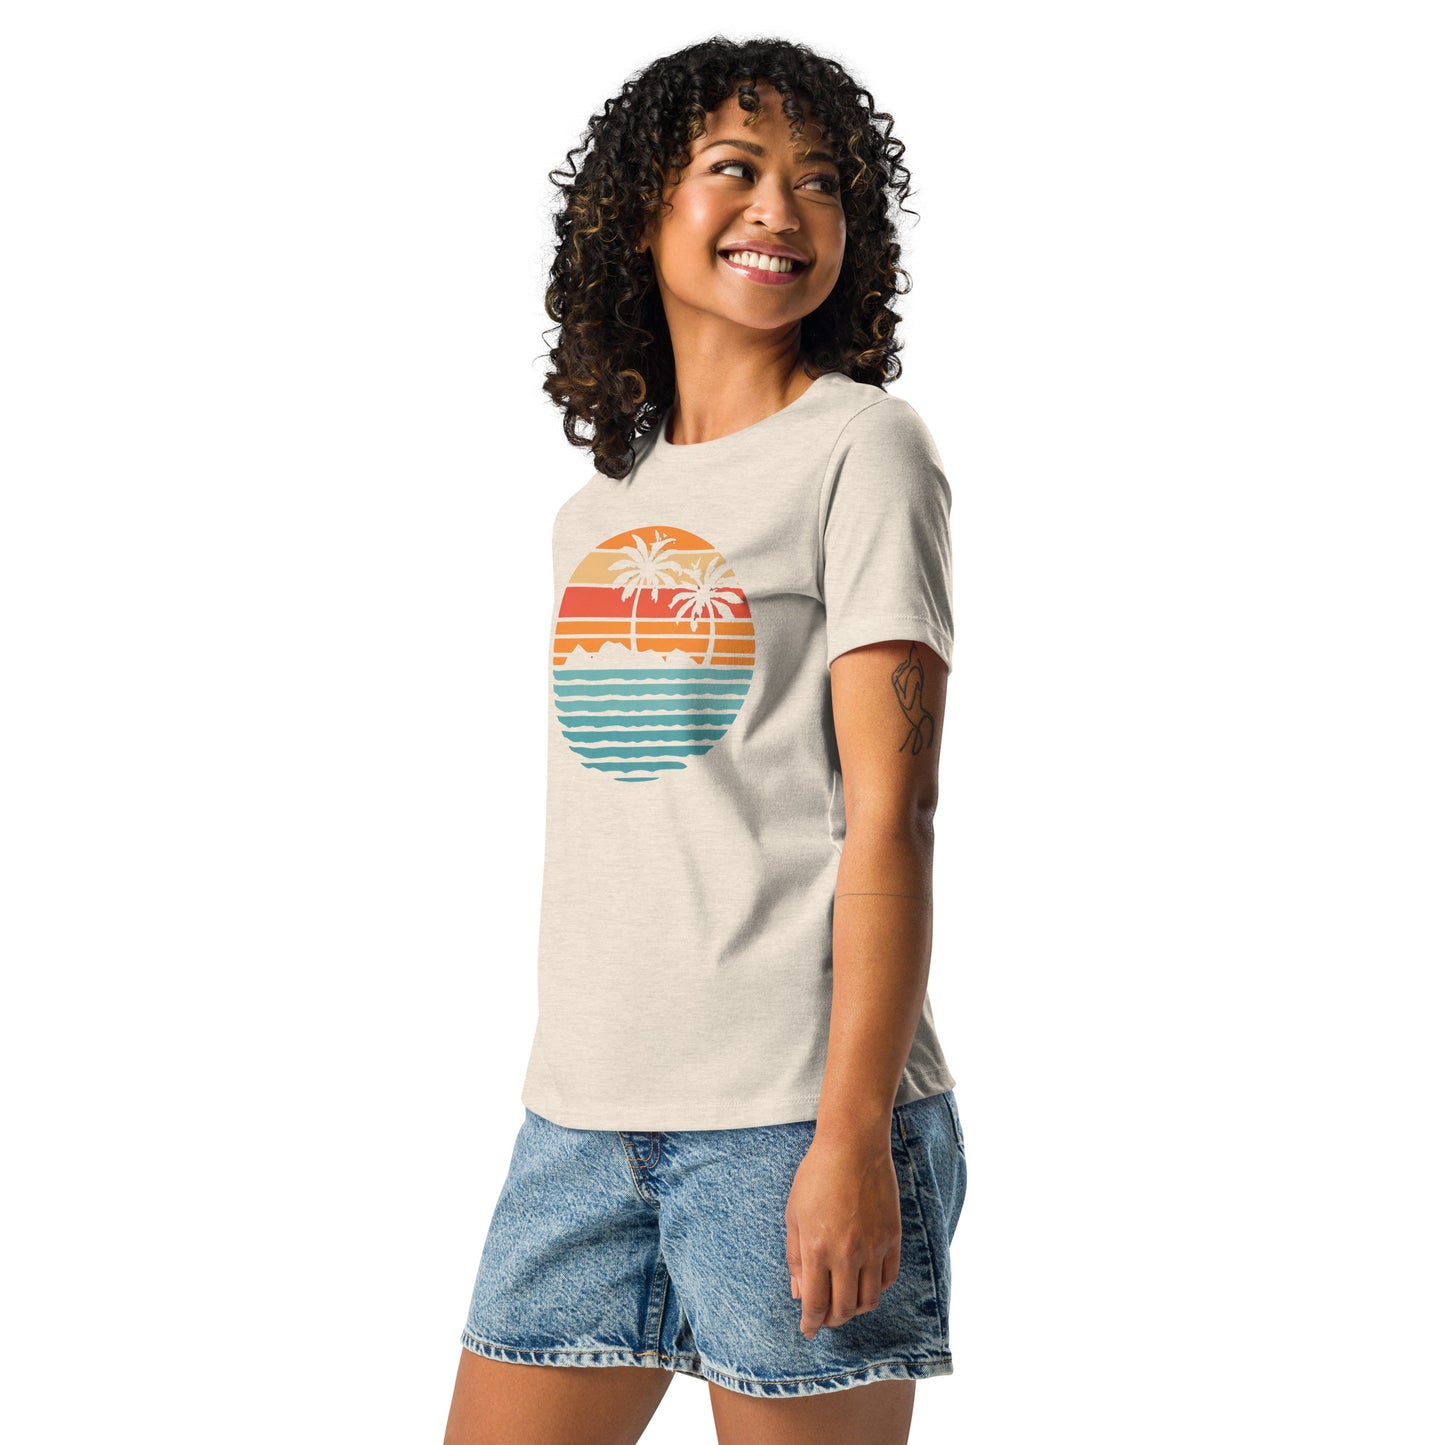 Women with naturel T-shirt and a retro Island